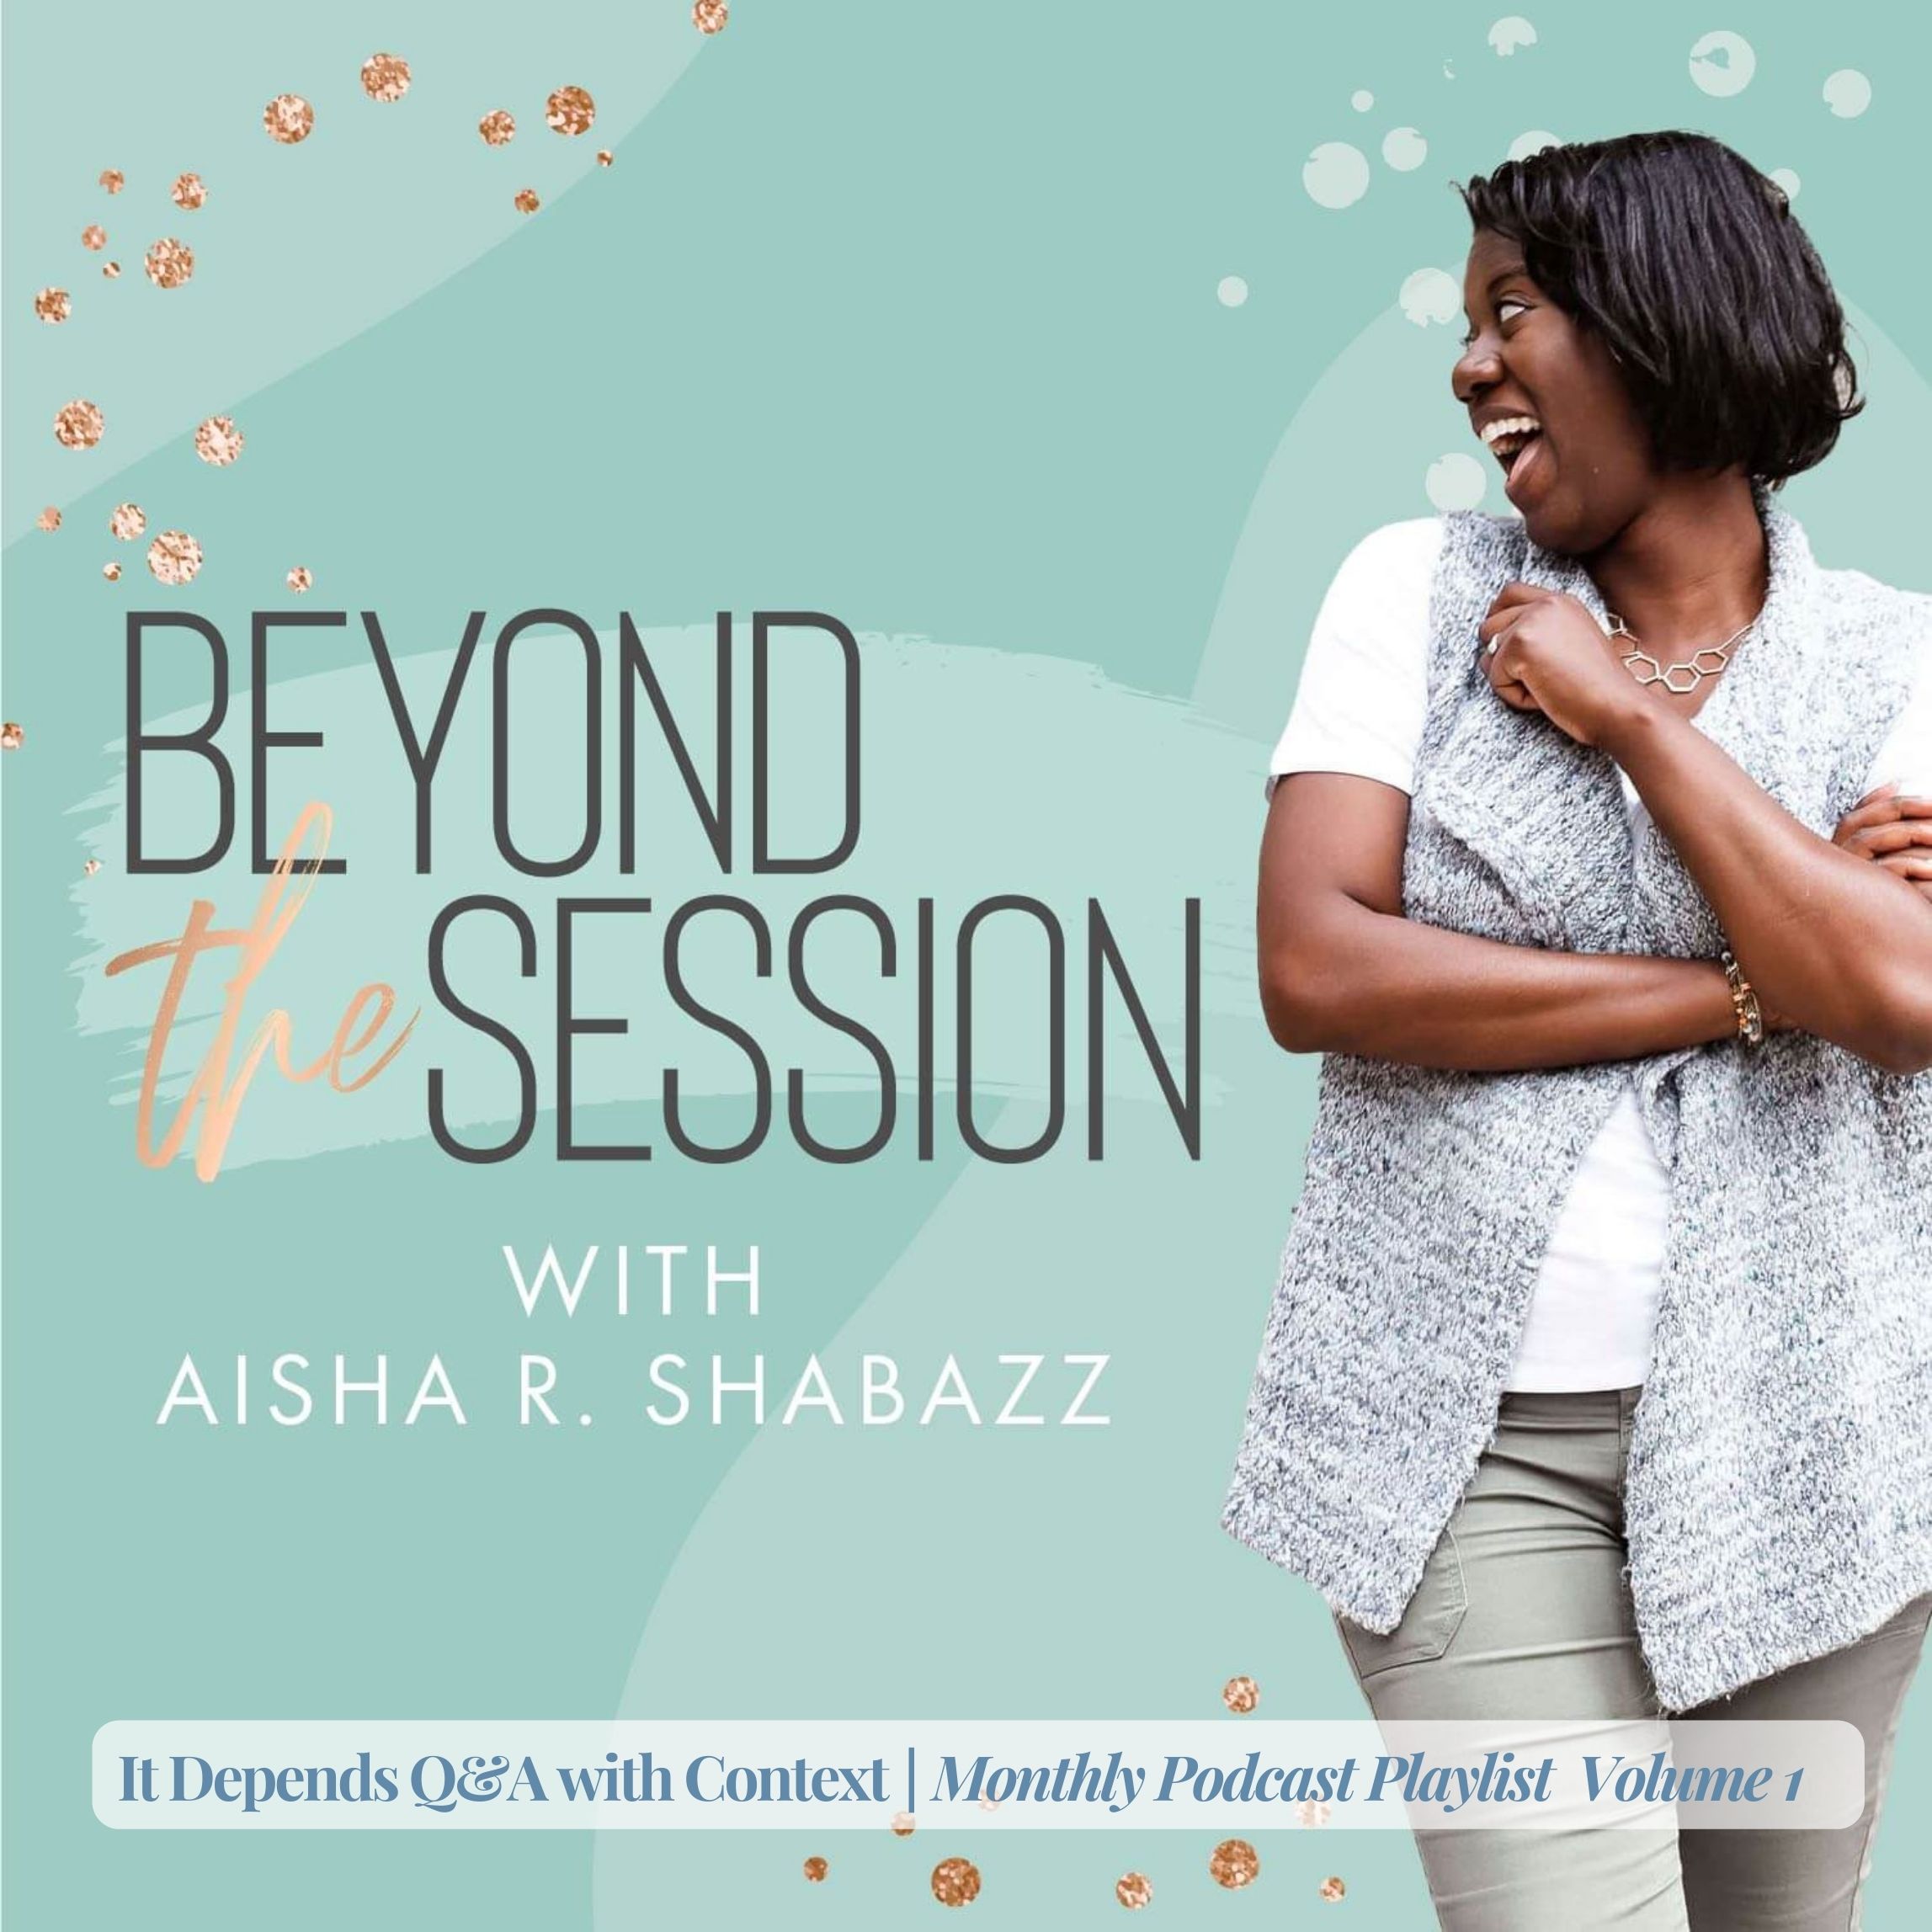 Beyond the Session with Aisha R. Shabazz, It Depends: Q&A with Context, Monthly Podcast Playlist | Volume 1